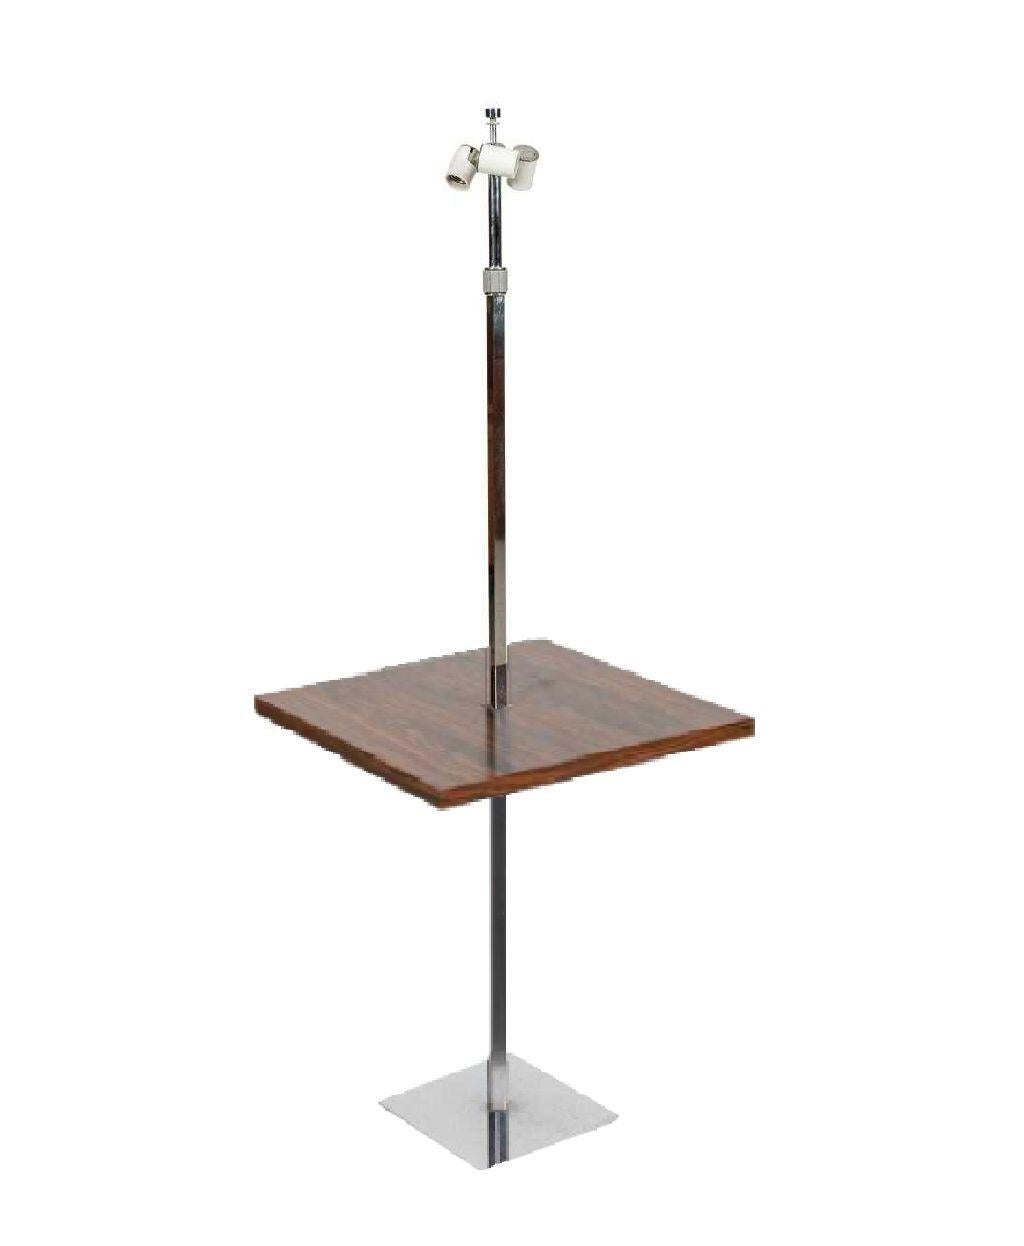 Midcentury Hansen New York steel floor lamp with rosewood table, 1950s lighting

Iconic 1950s floor lamp by Stewart Ross James for Hansen, featuring three ceramic cluster sockets on linear metal stem and square base. Cubic, stainless steel
shaft